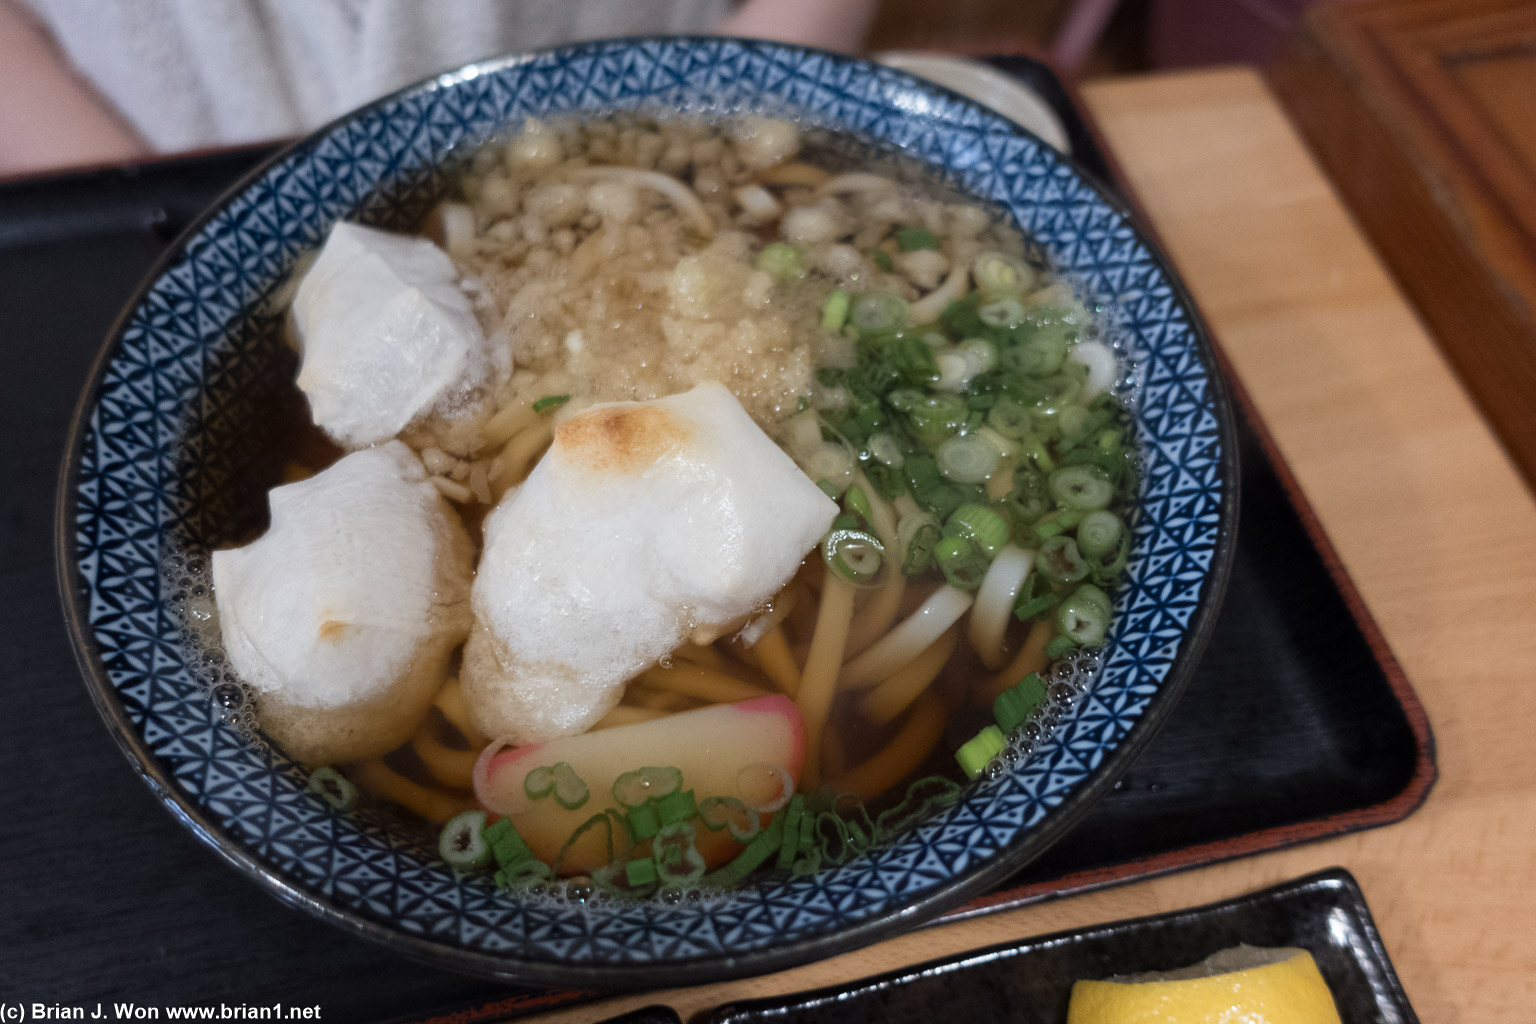 Mochi (!) and udon.